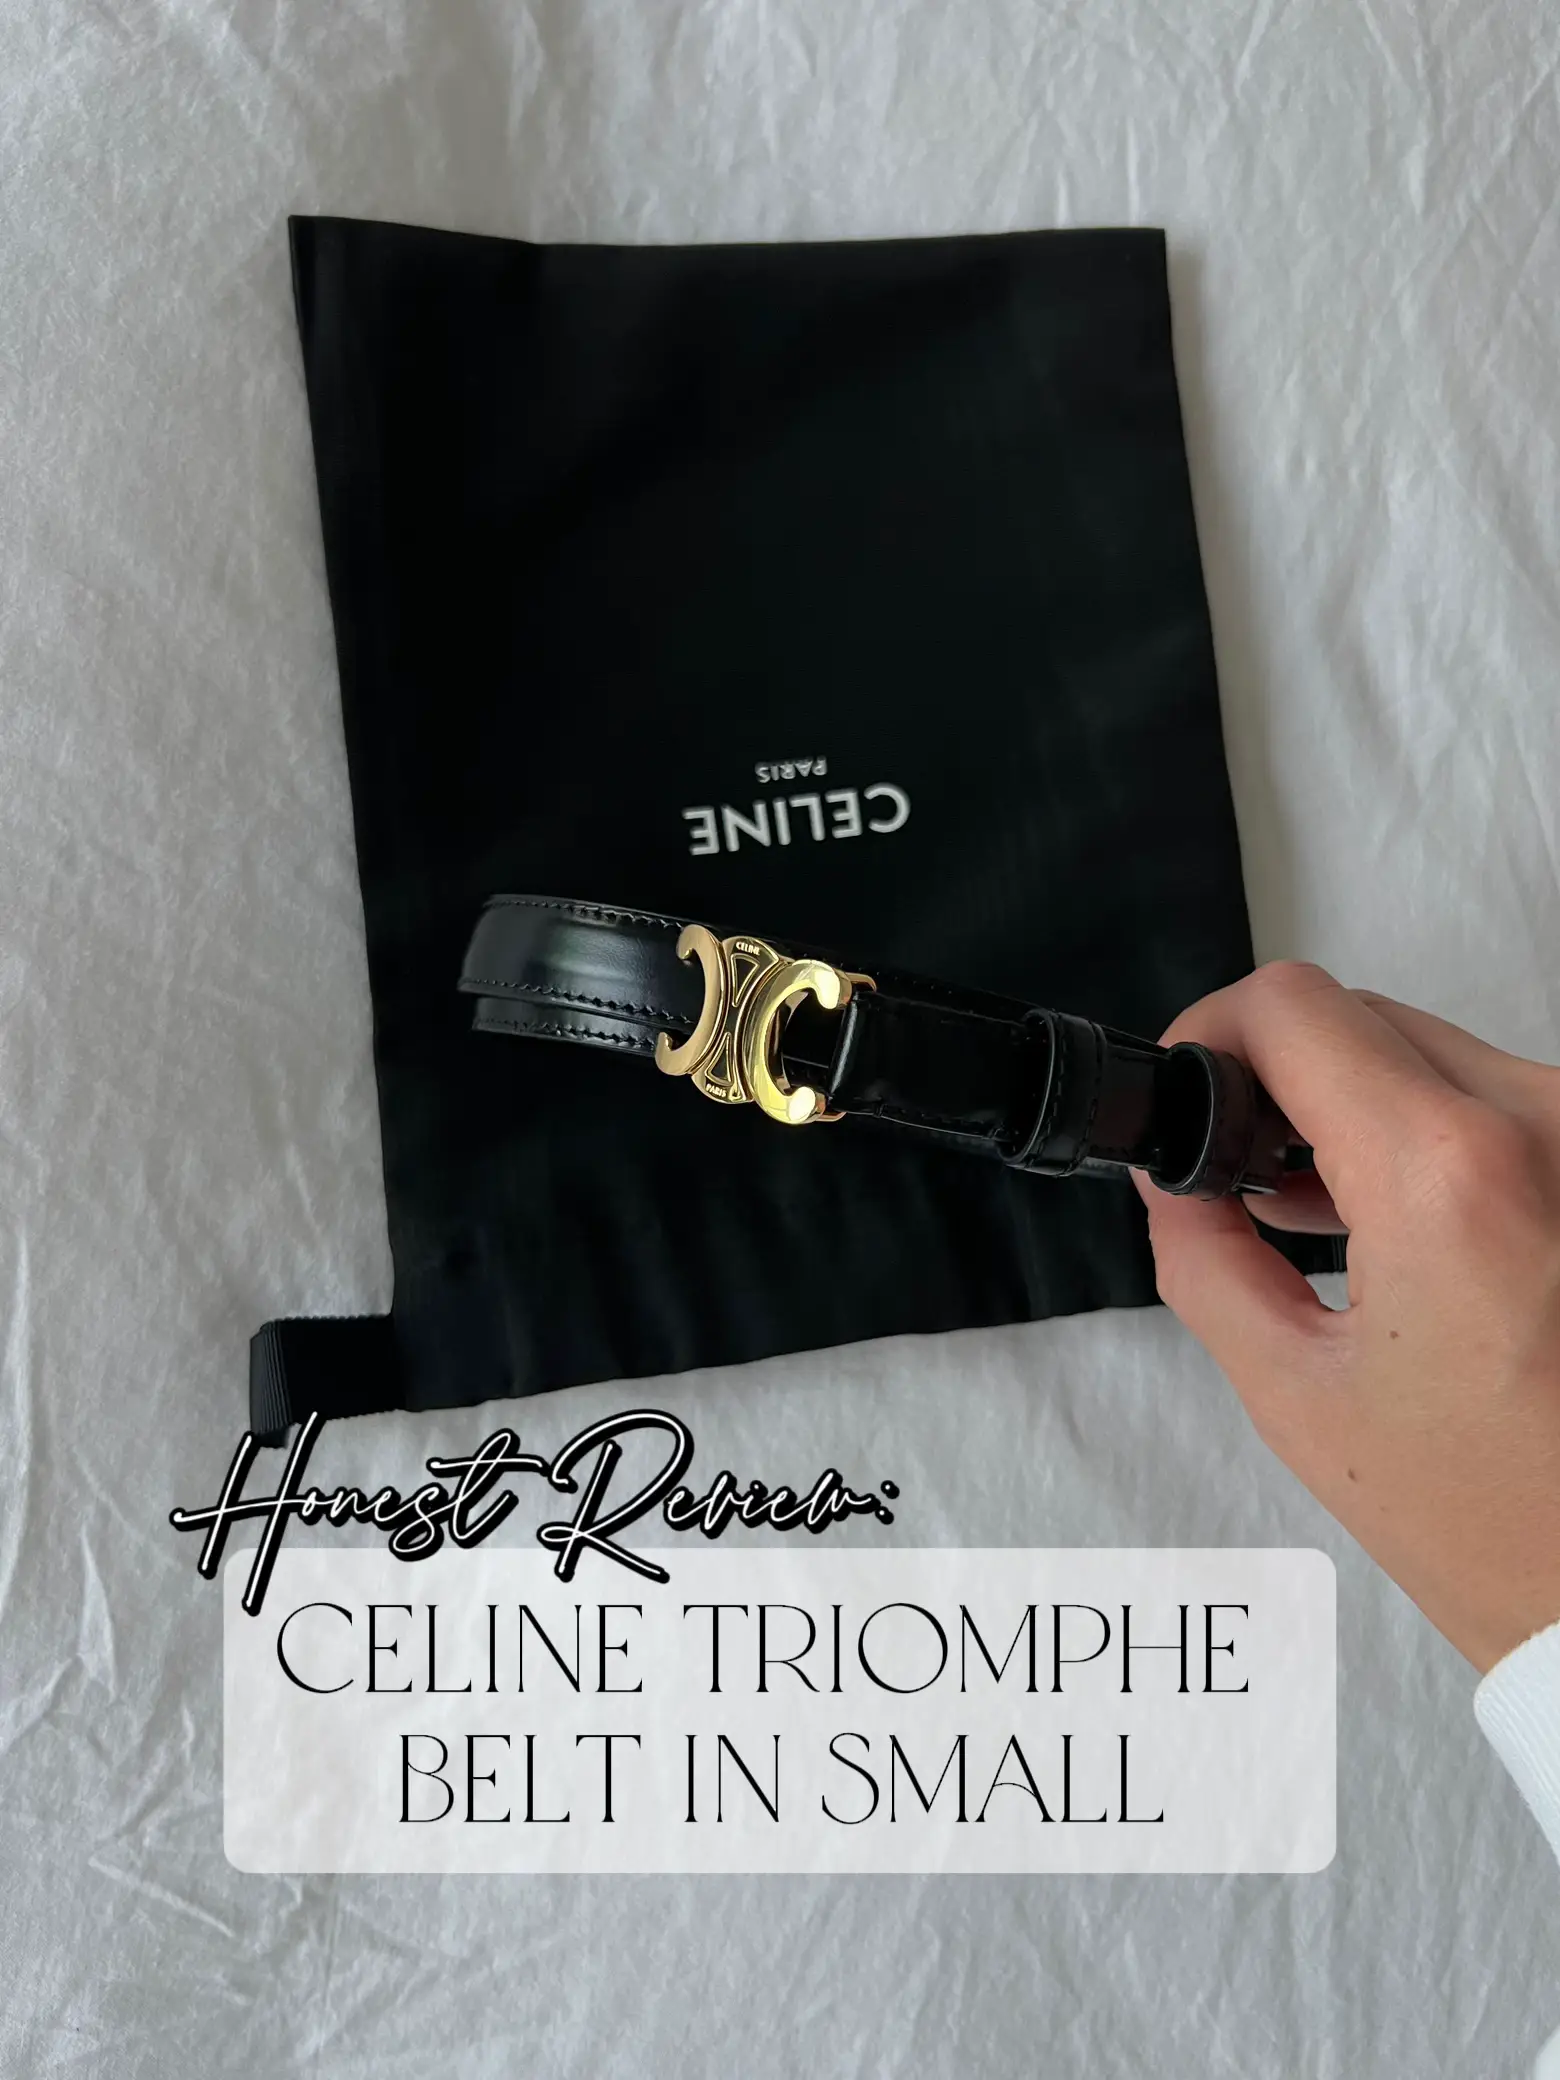 Celine Triomphe Belts Review: Black & Tan, Sizes, Try On 